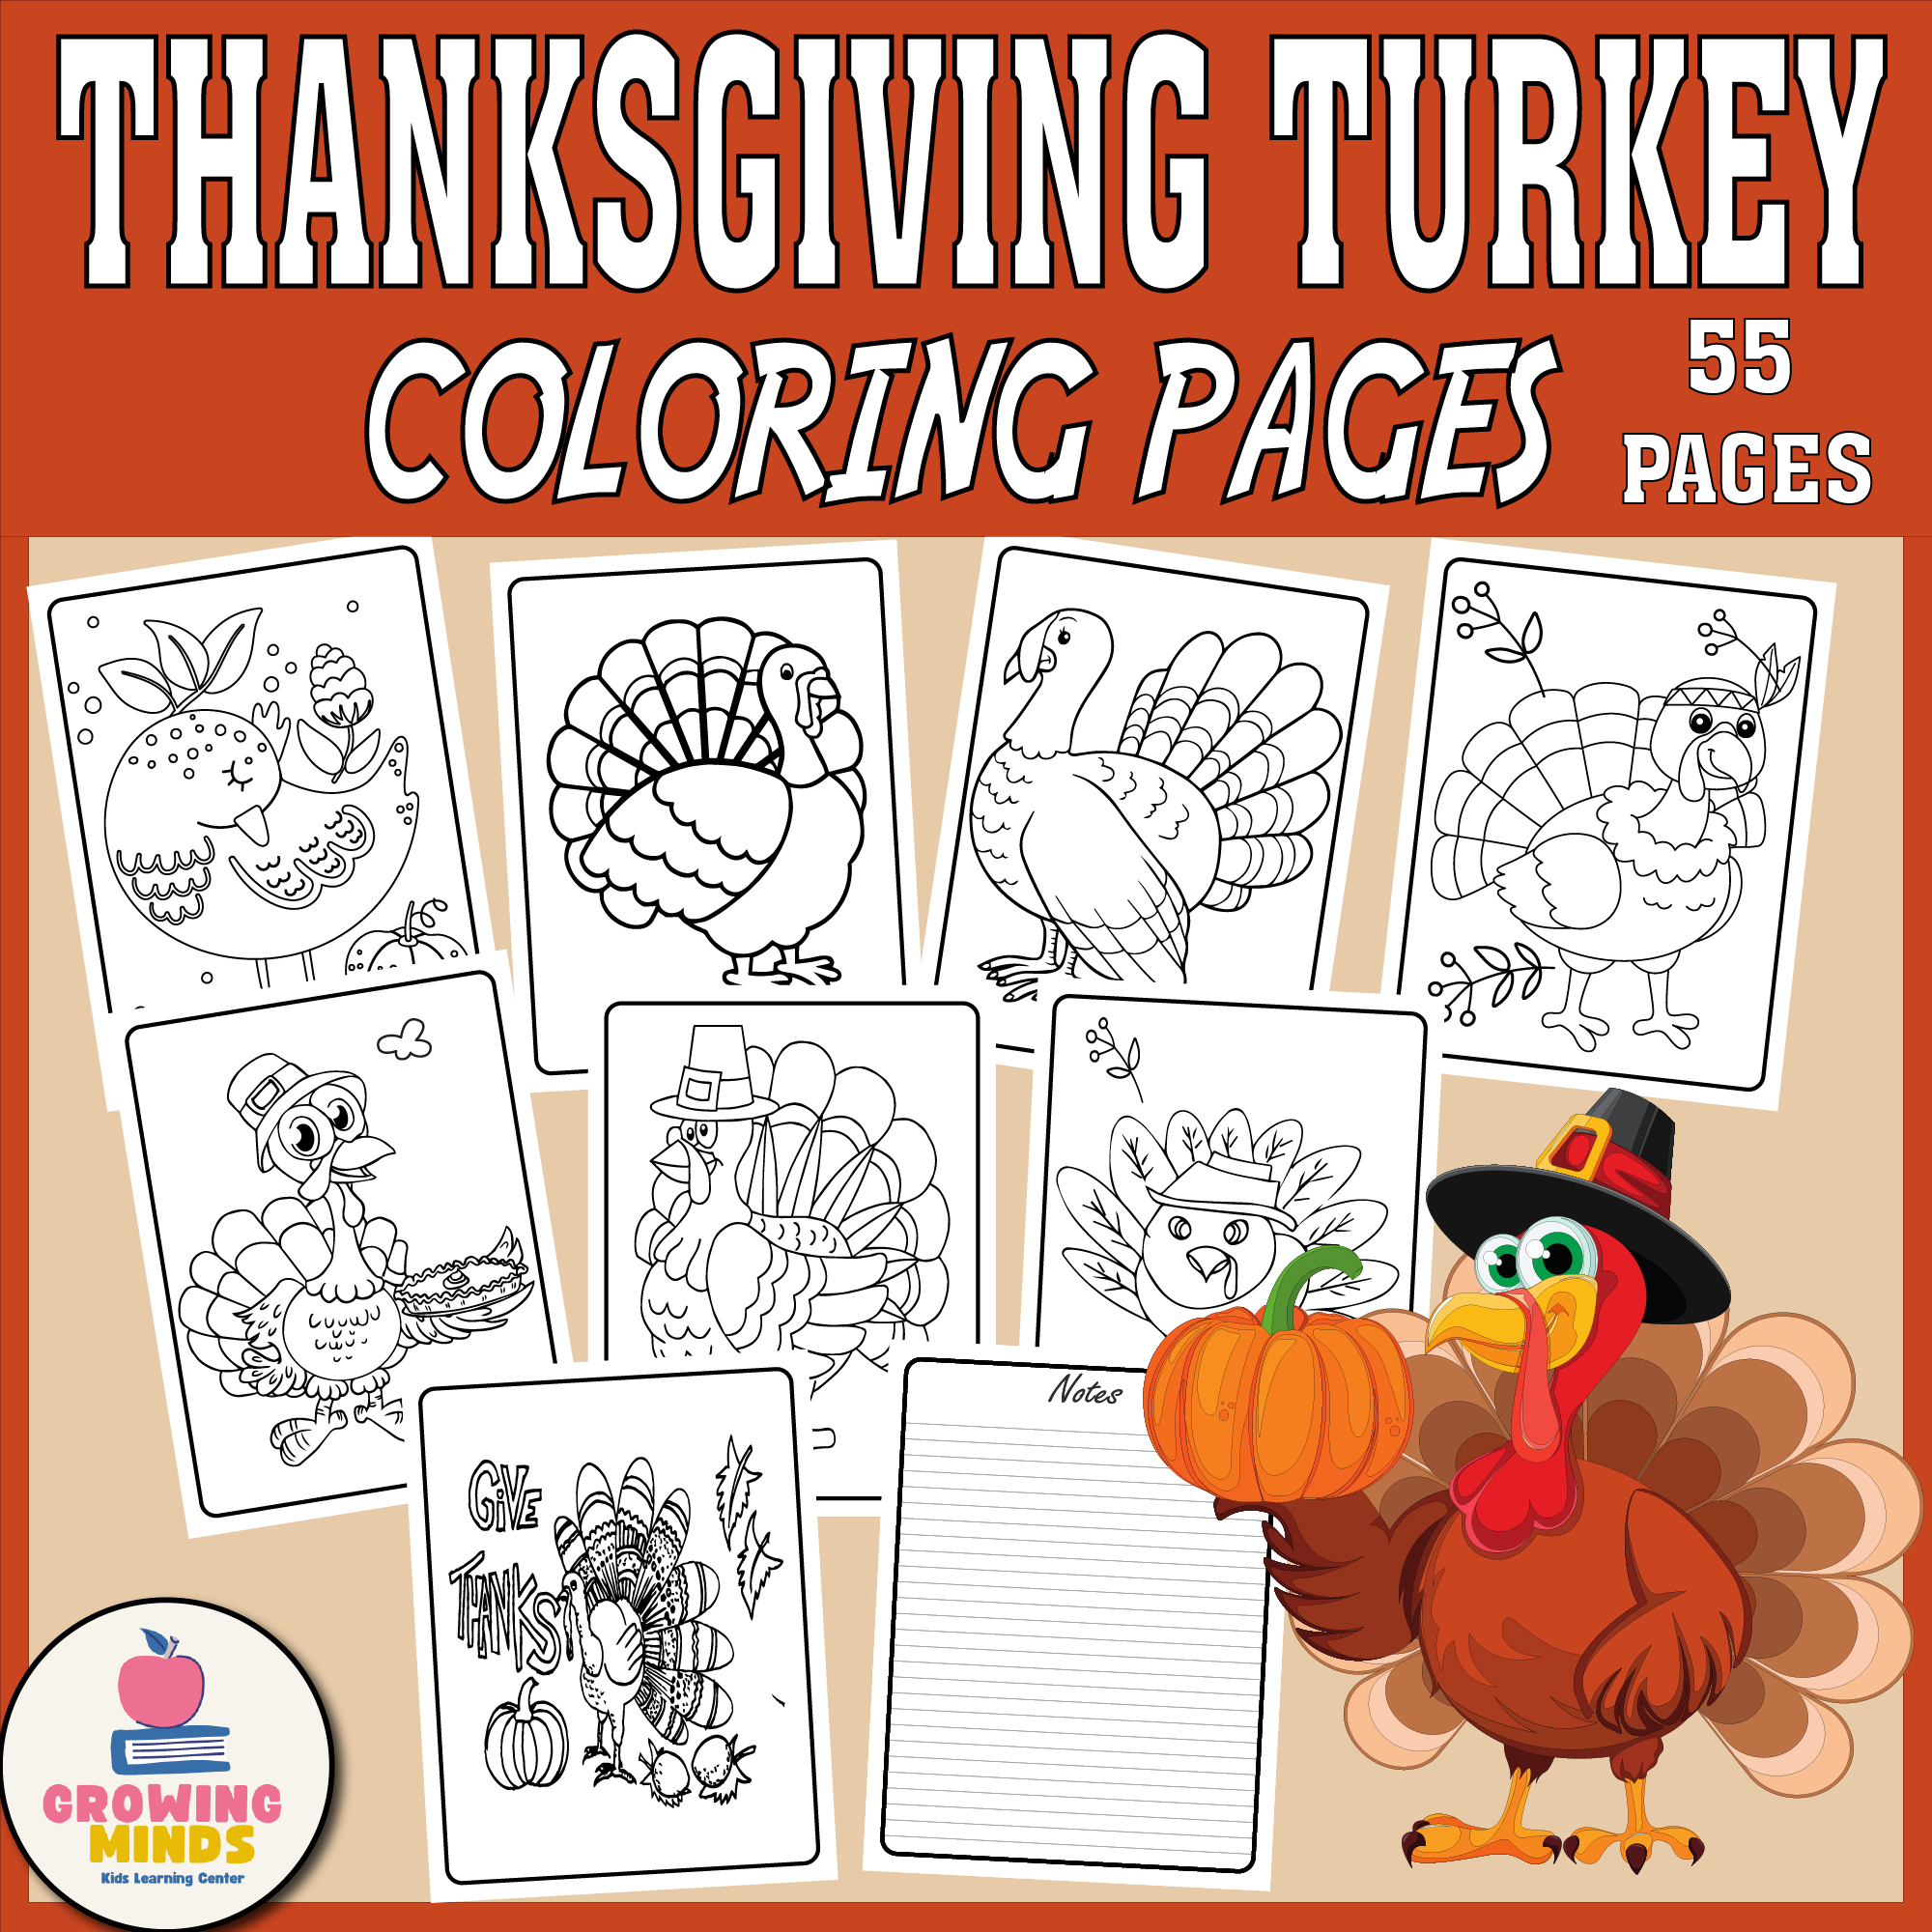 Thanksgiving turkey coloring pages writing notes